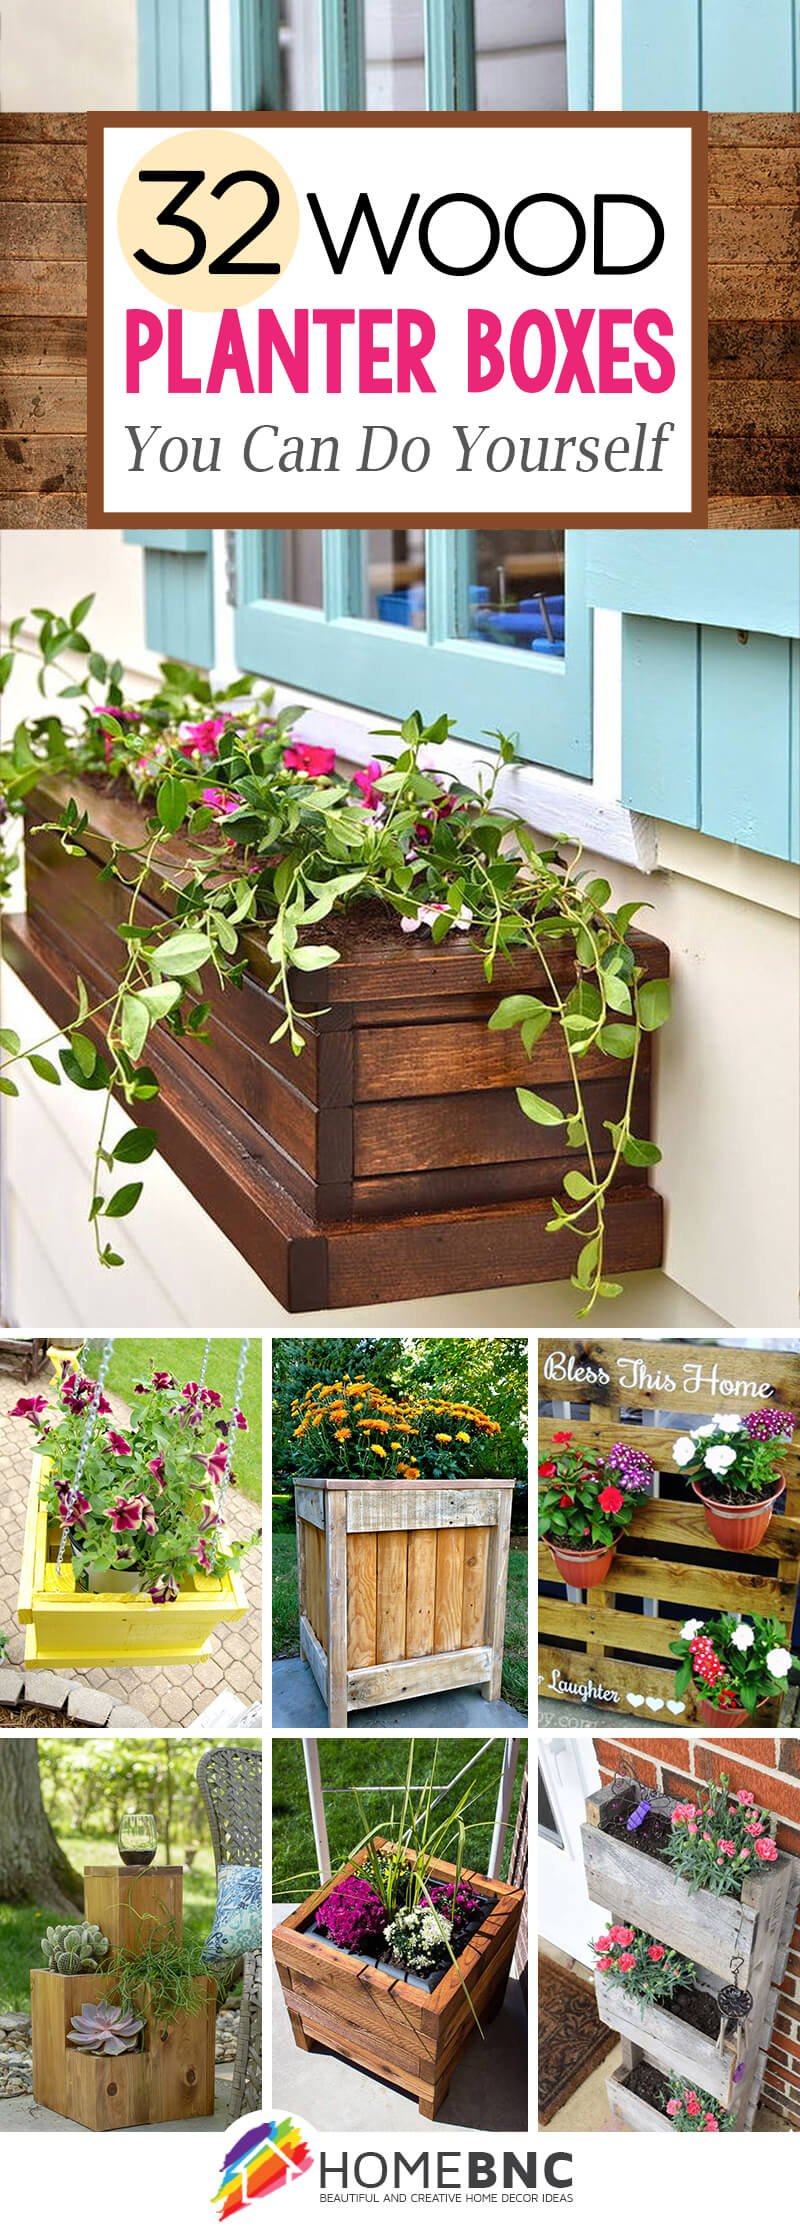 Diy Pallet And Wood Planter Box Ideas, Diy Garden Box From Pallets